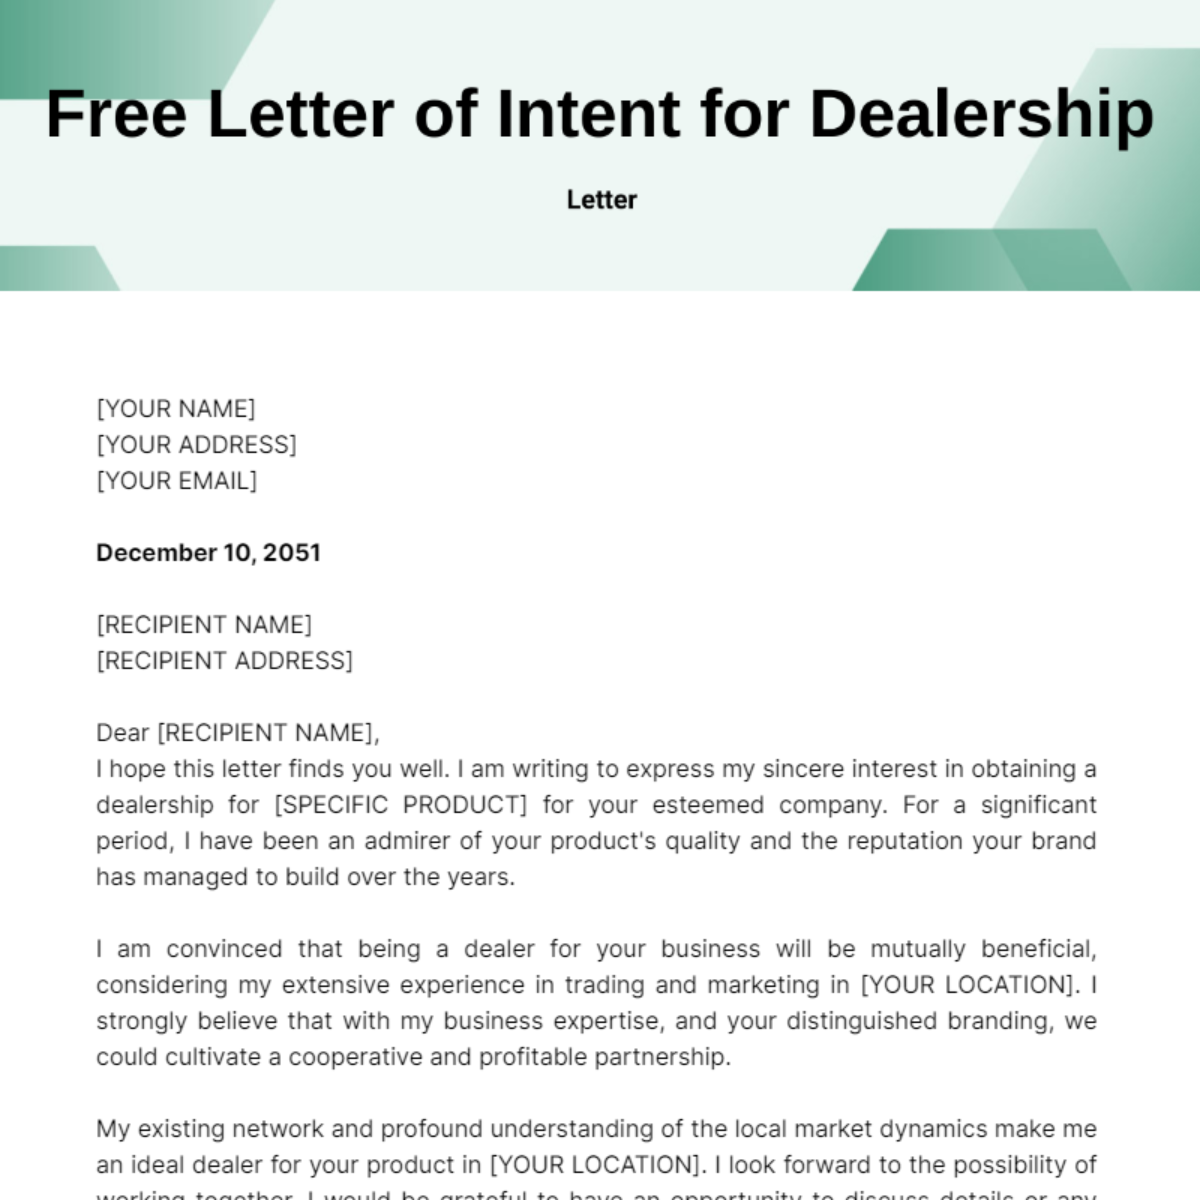 Letter of Intent for Dealership Template